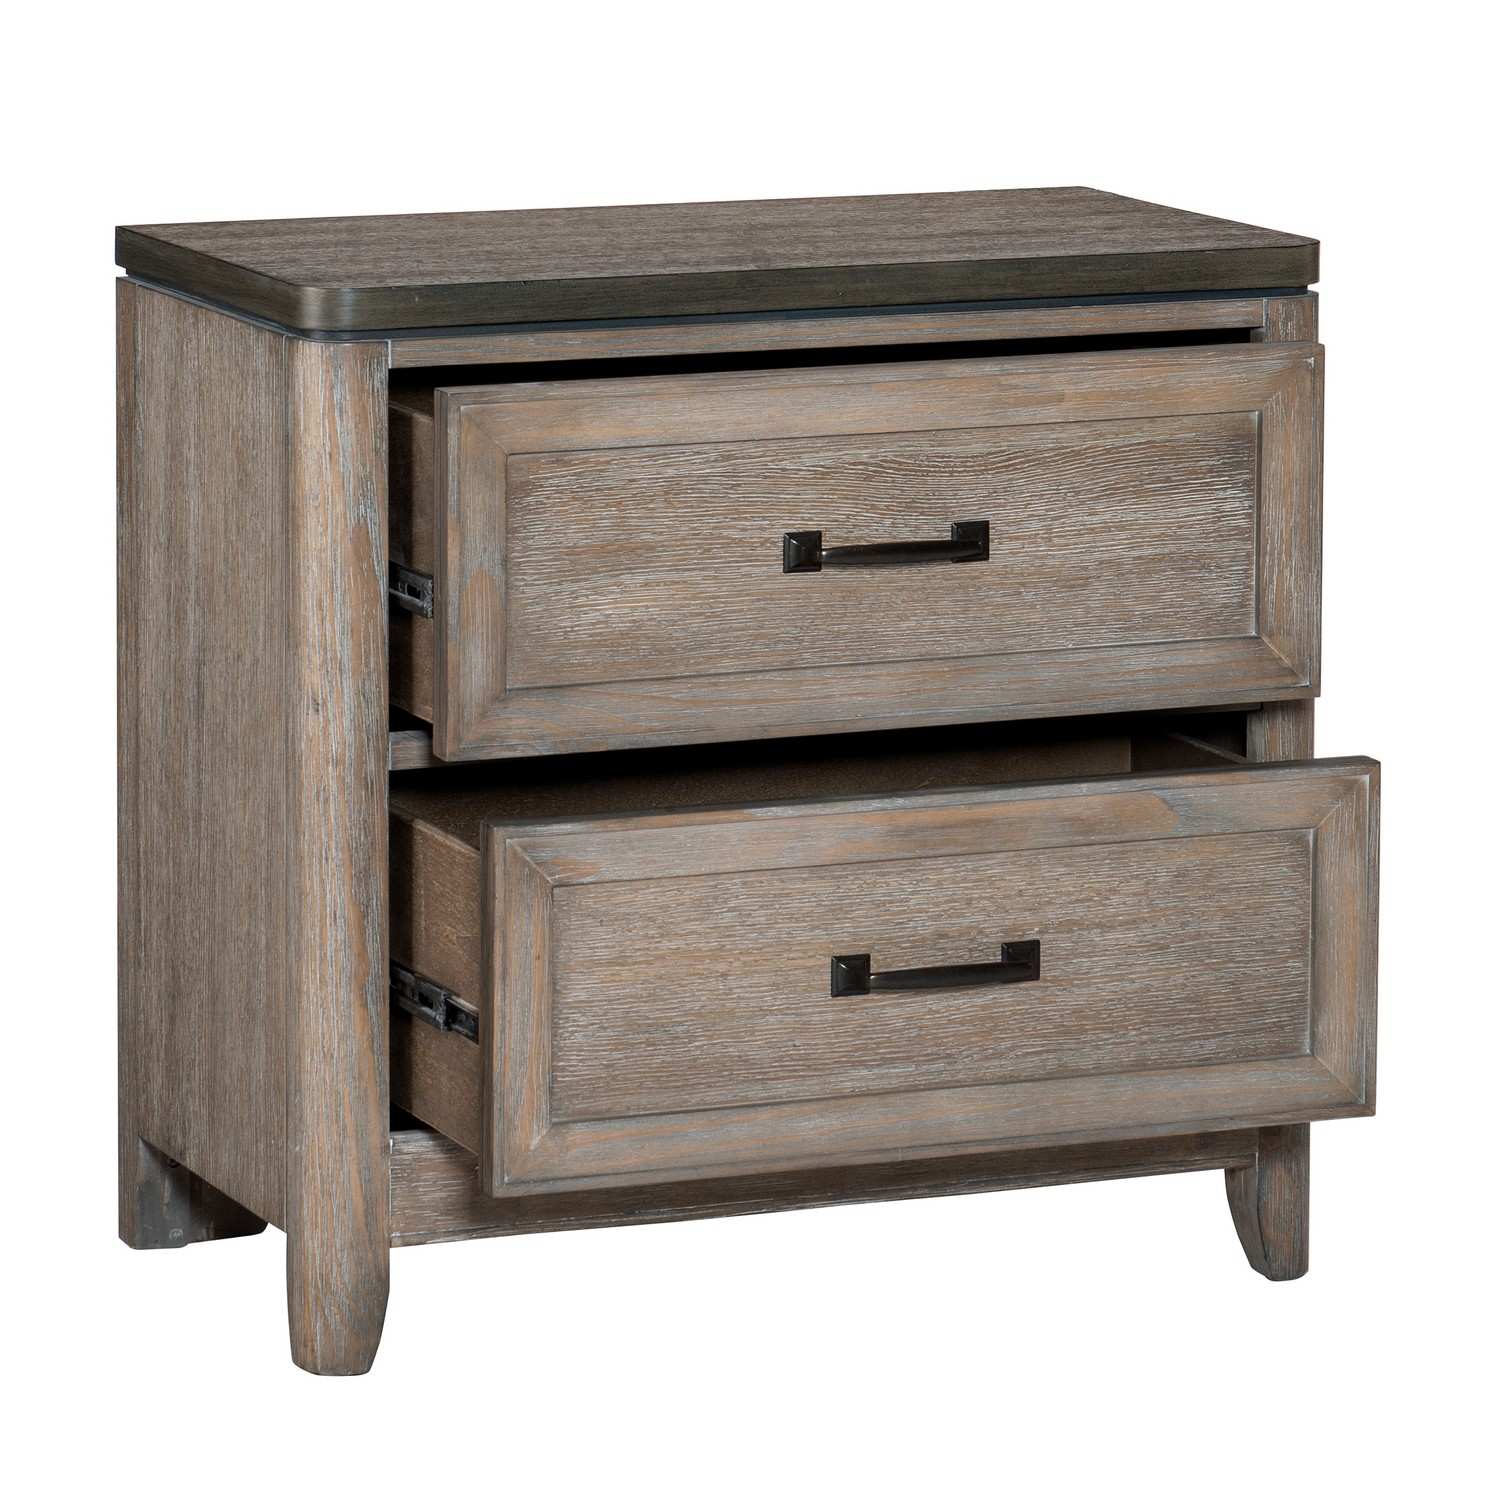 Homelegance Newell Night Stand - Two-tone finish: Brown and Gray